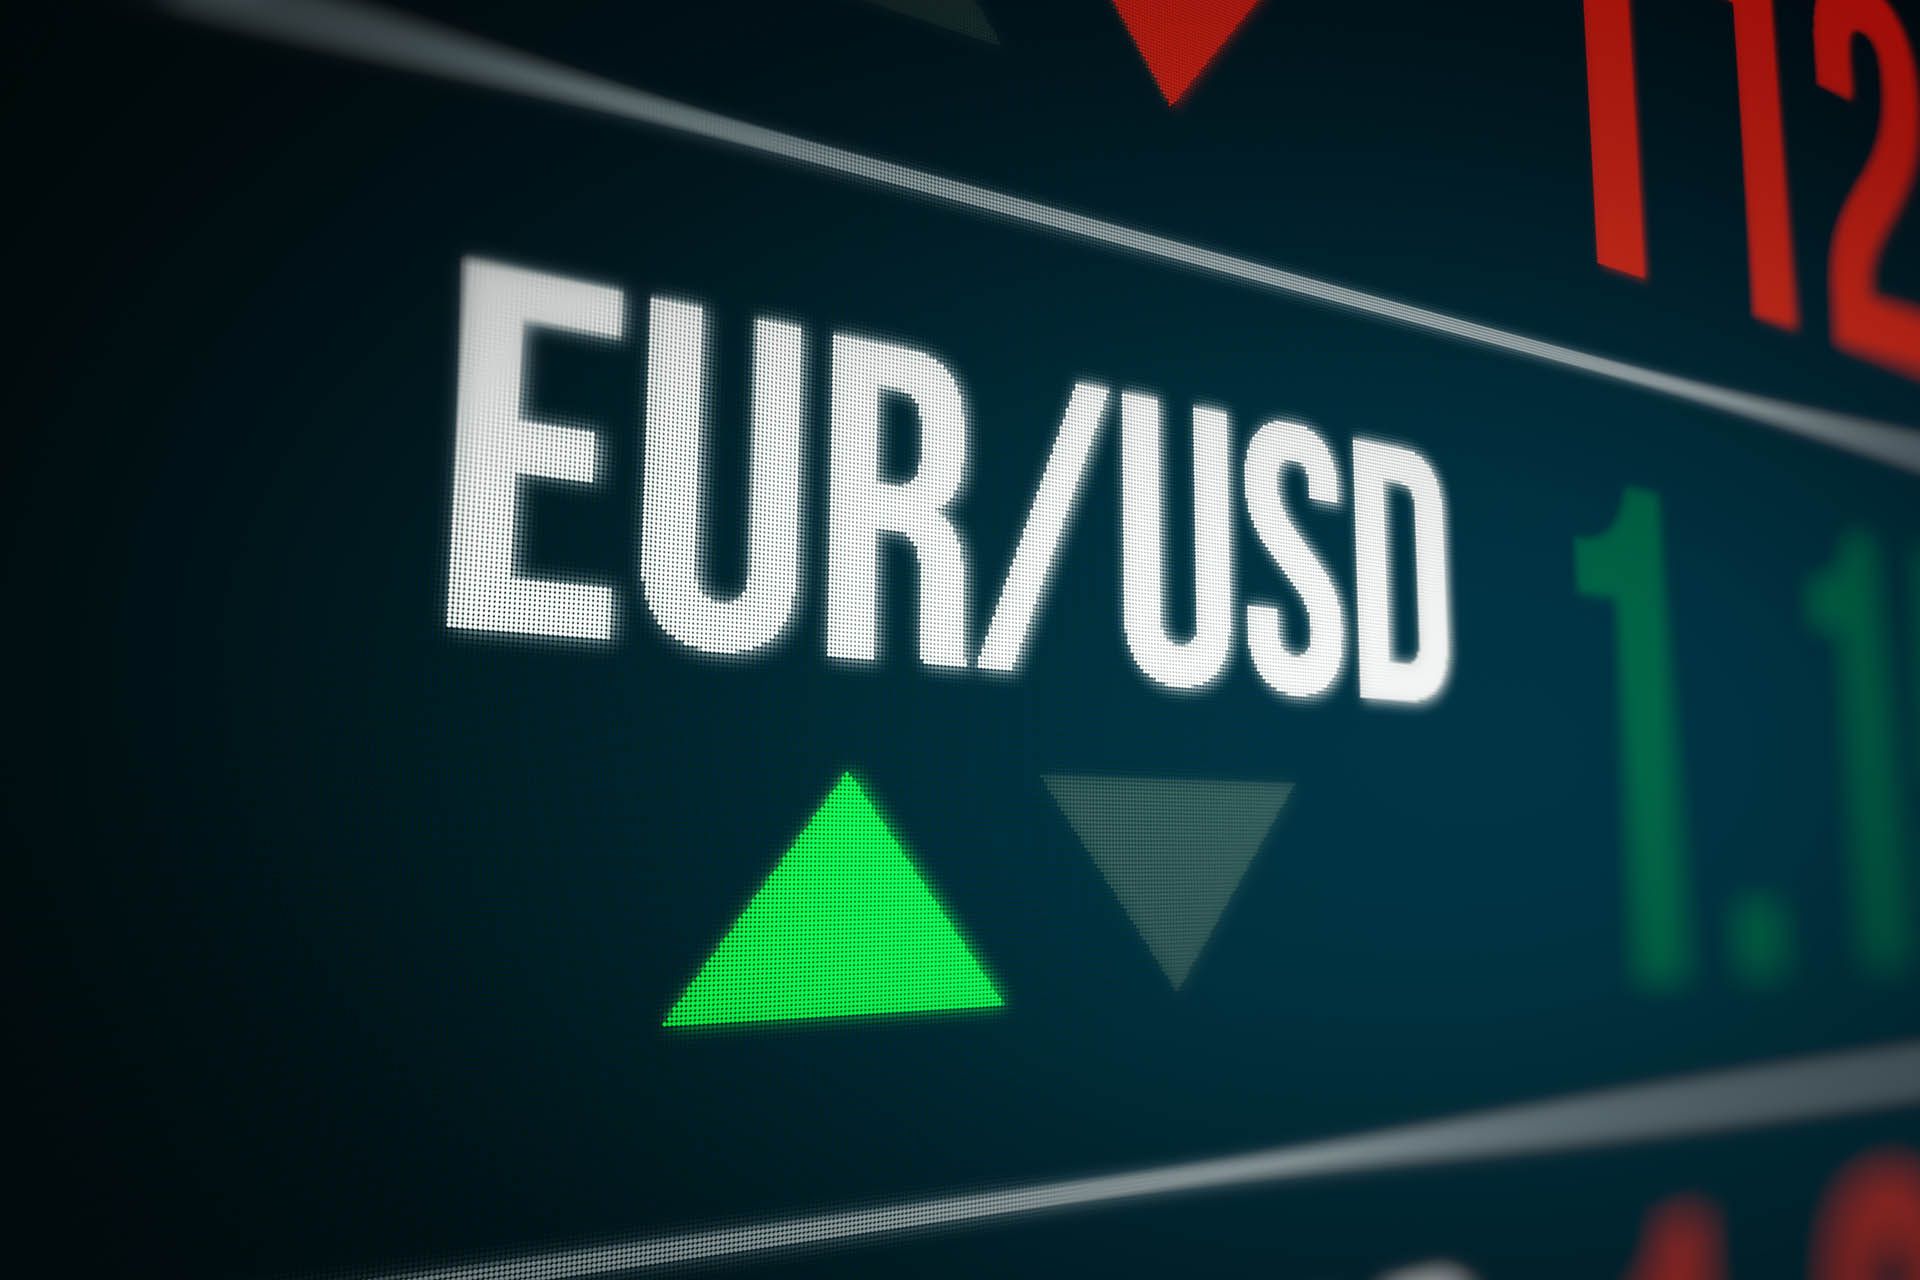 Euro / Dollar Week Ahead Forecast: Attempting Recovery but Risking  Frustration